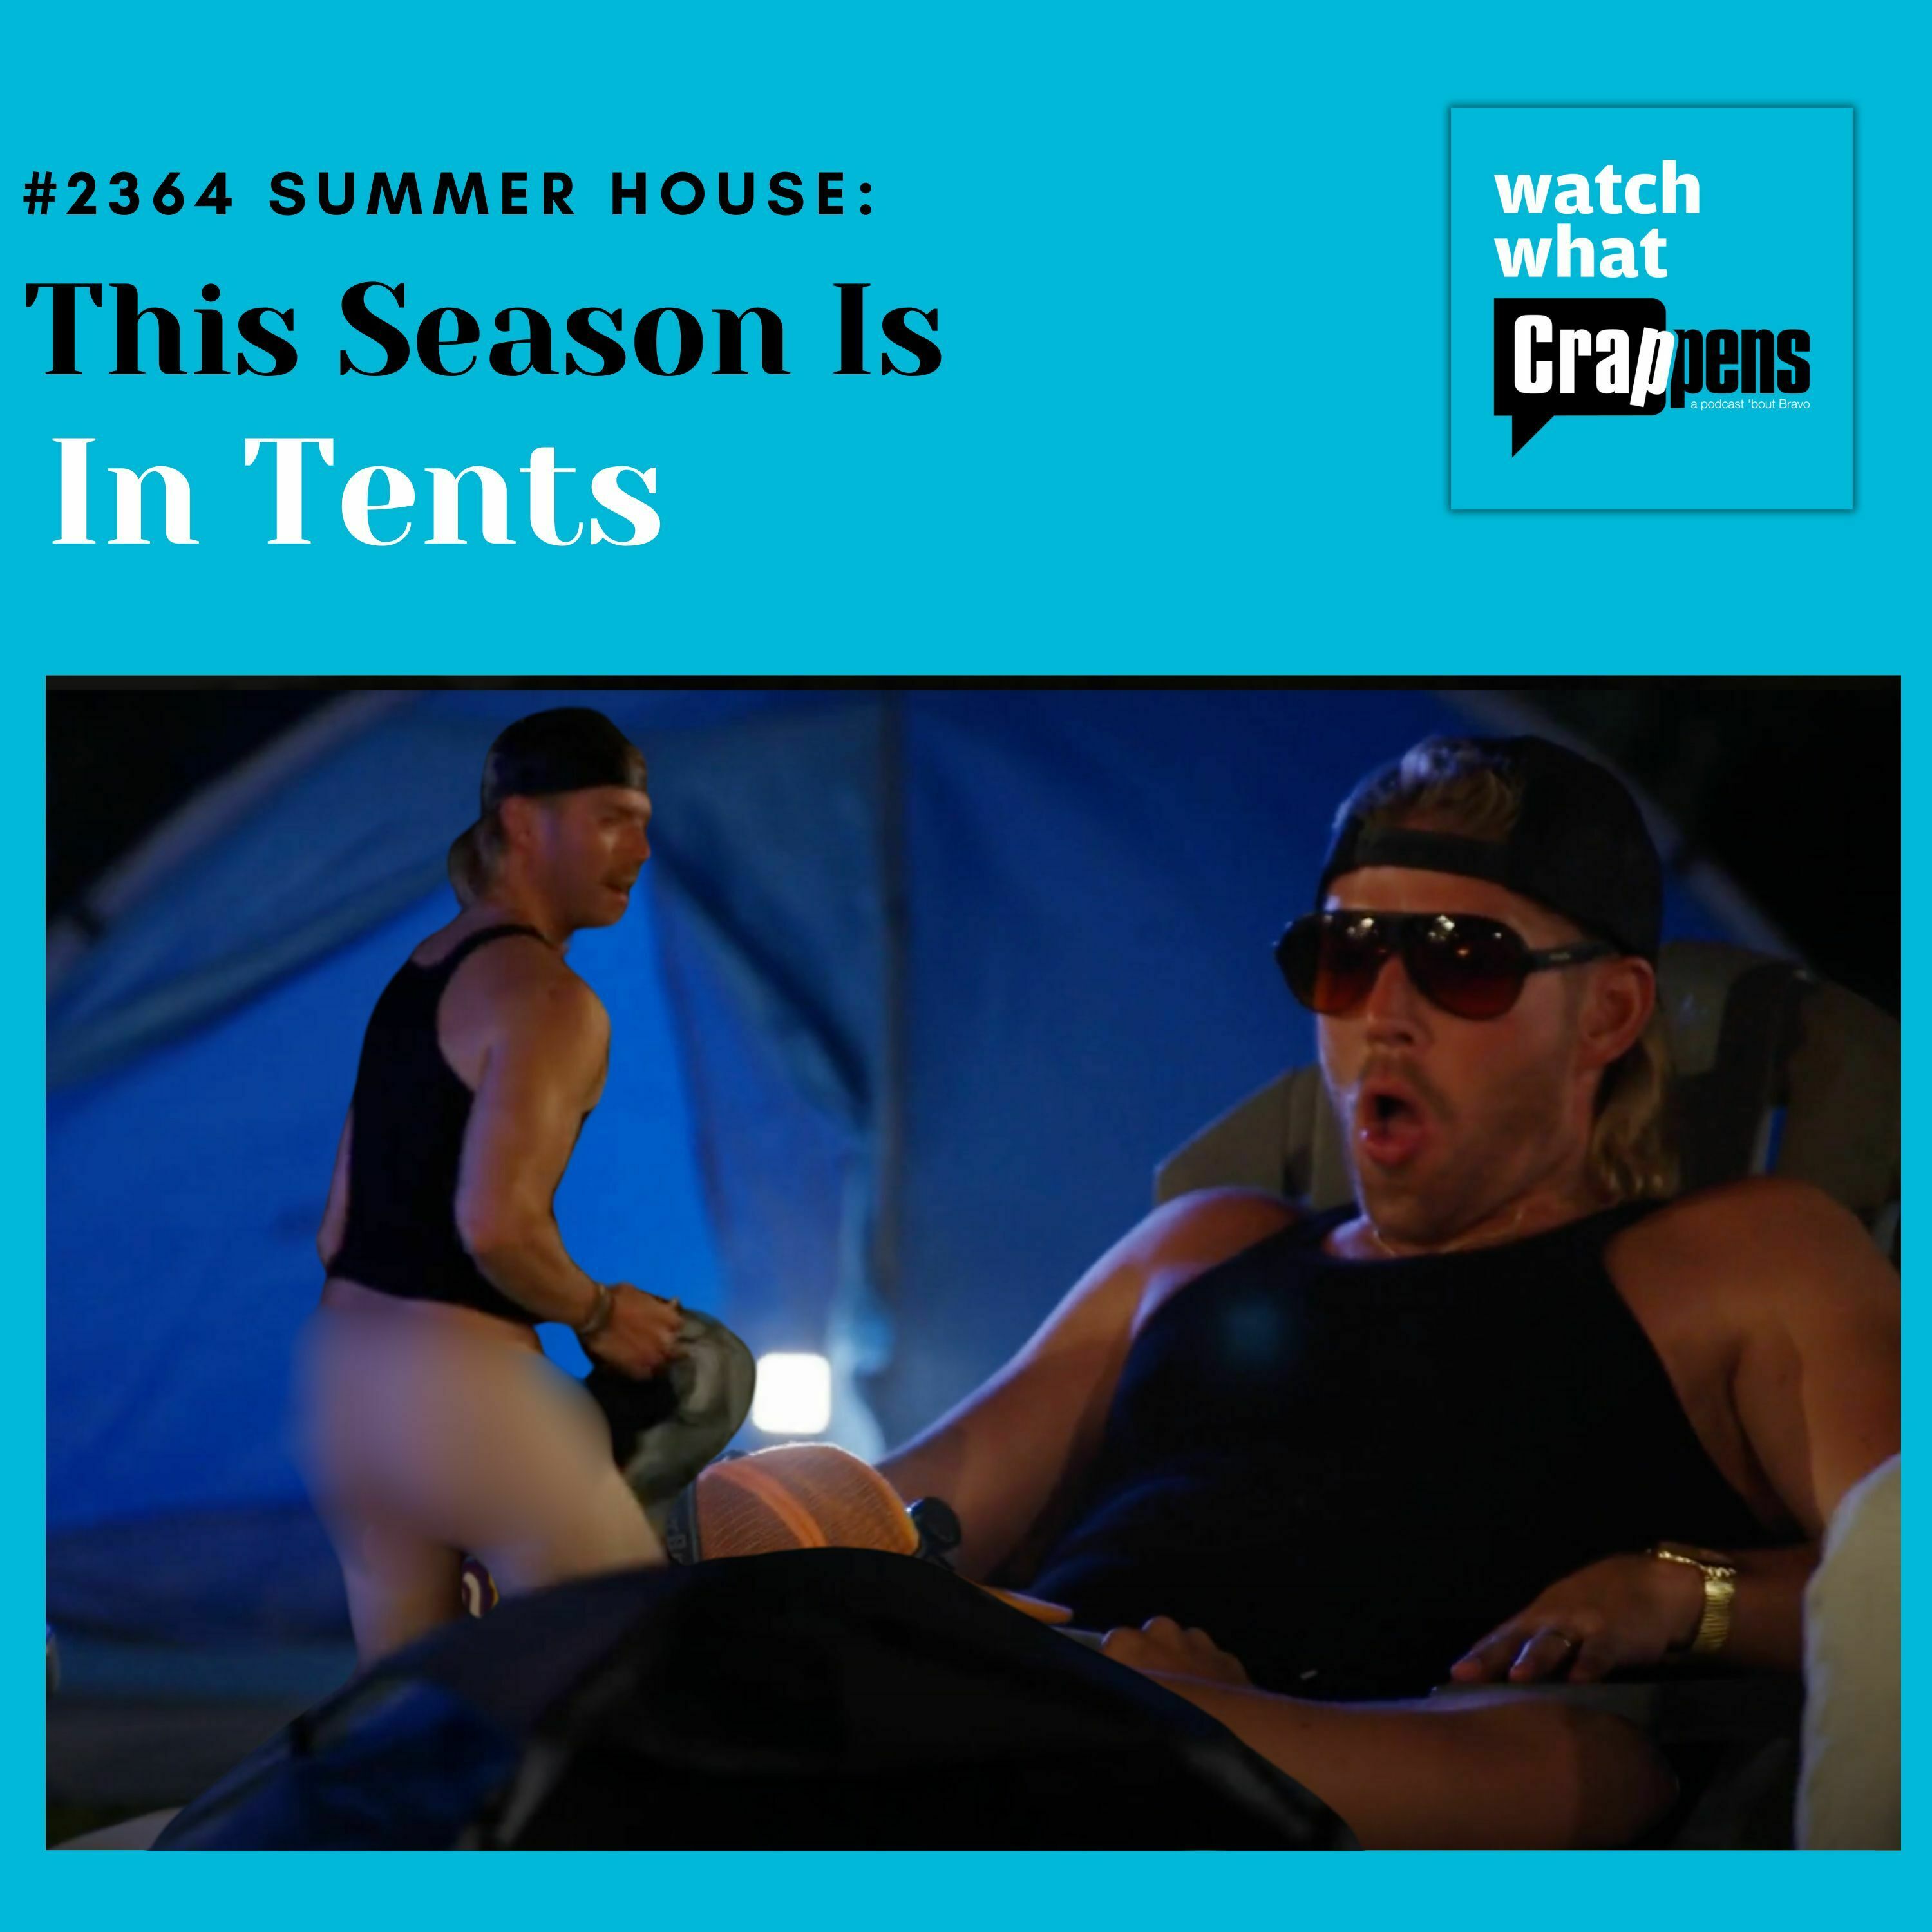 #2364 Summer House: This Season Is In Tents